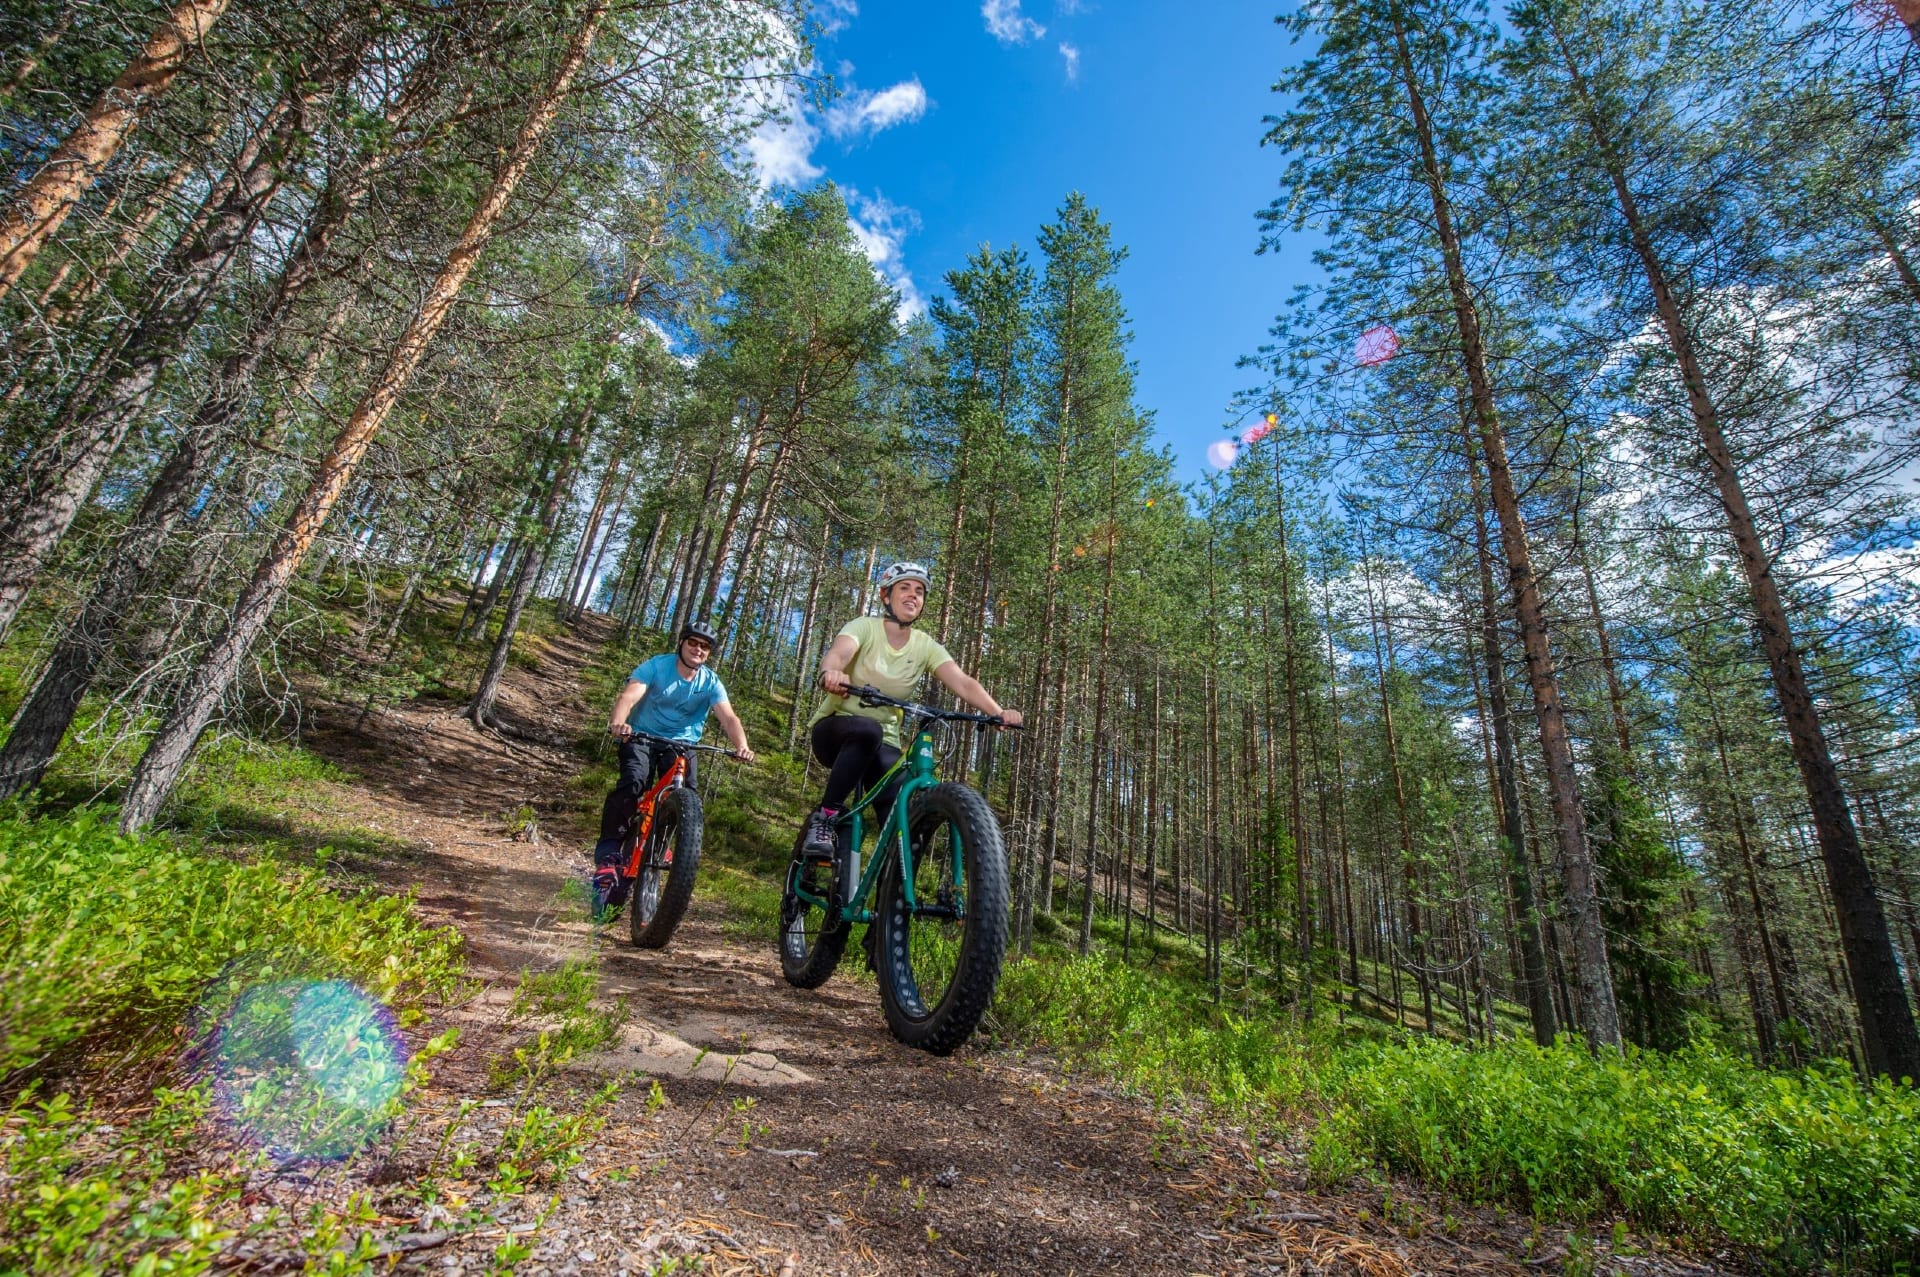 The 19-km Syötteen kierros trail is one of Finland's most acclaimed mountain biking trails.